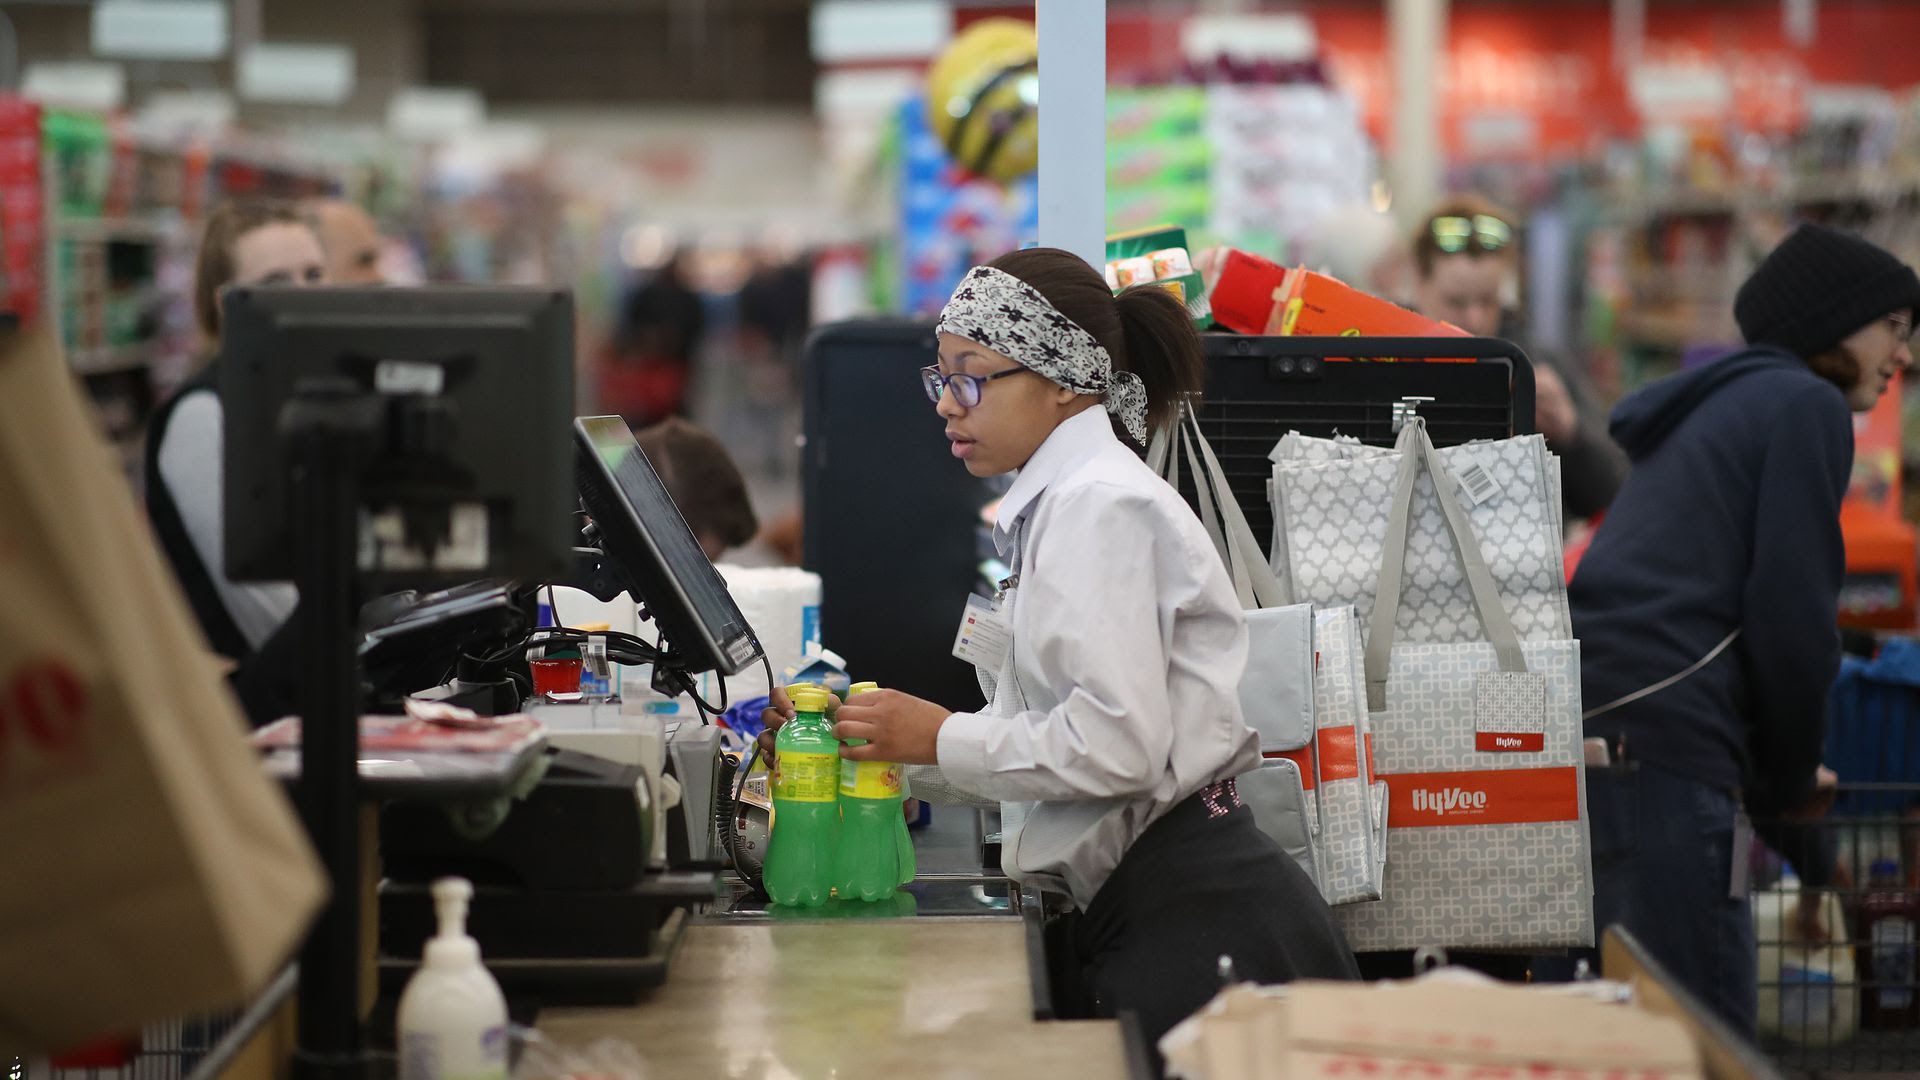 A cashier at Hy-Vee.